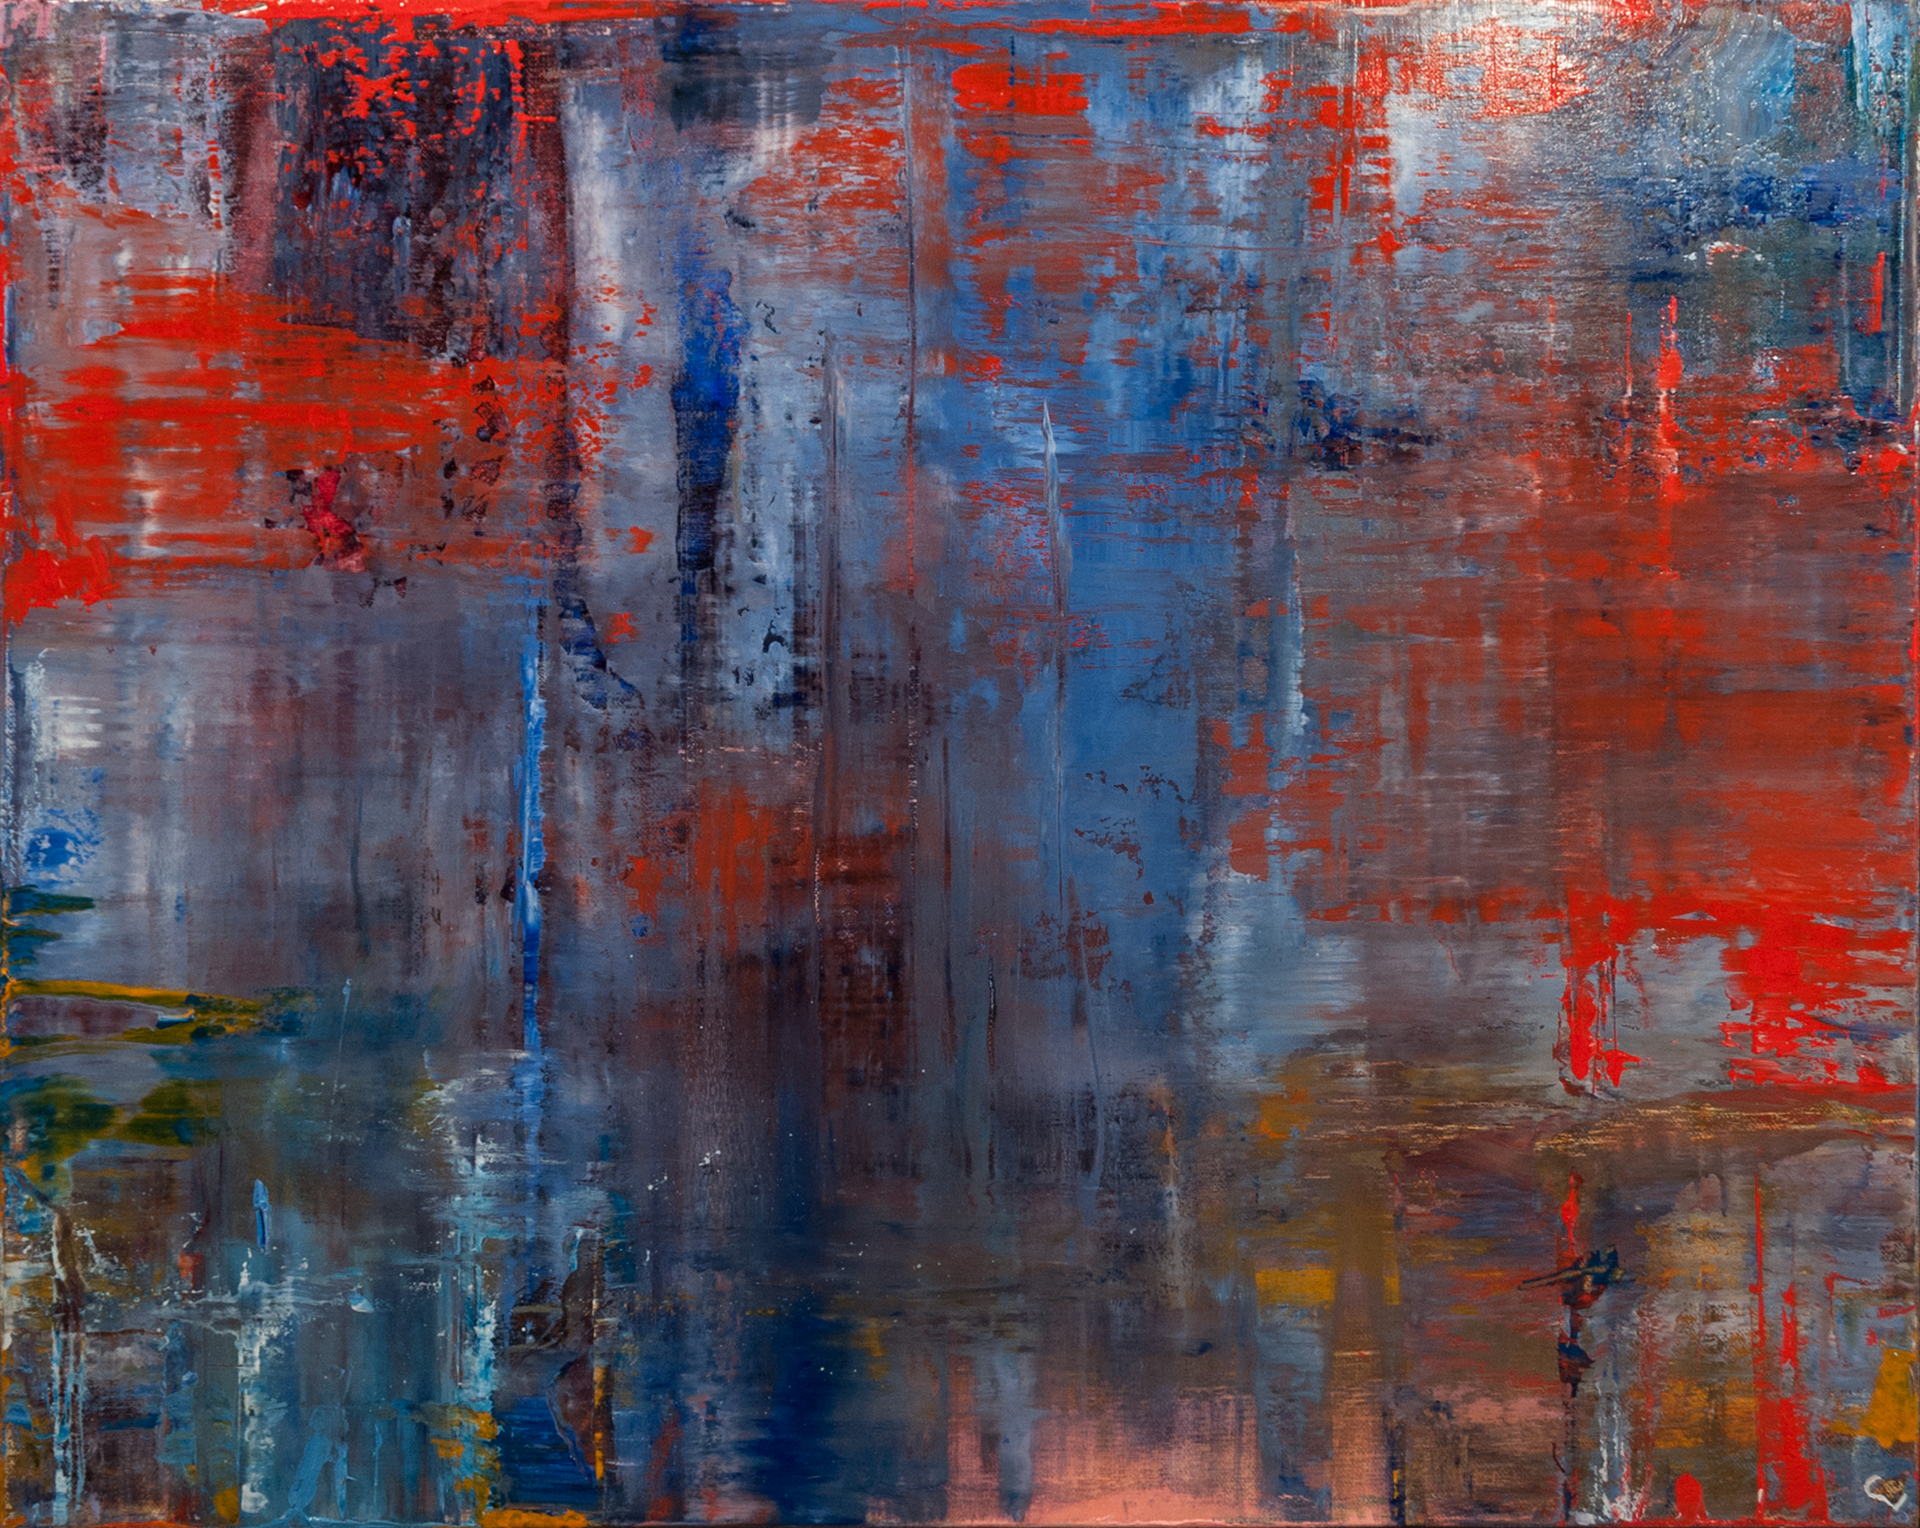 Abstract in Red by Chris Veeneman